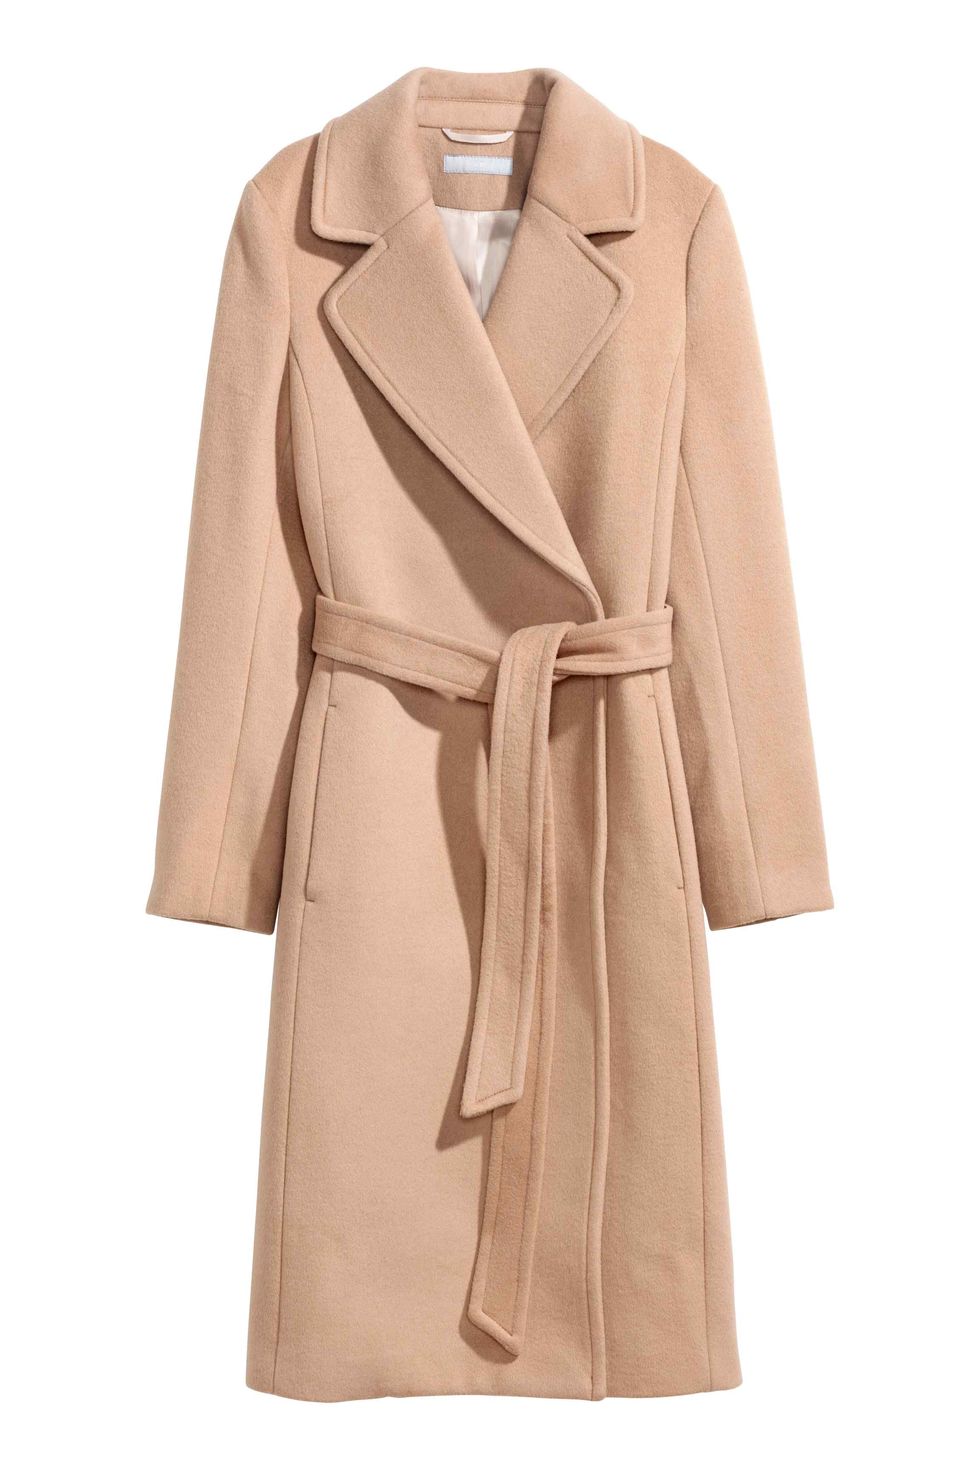 Clothing, Coat, Trench coat, Outerwear, Overcoat, Robe, Sleeve, Duster, Beige, Wrap, 